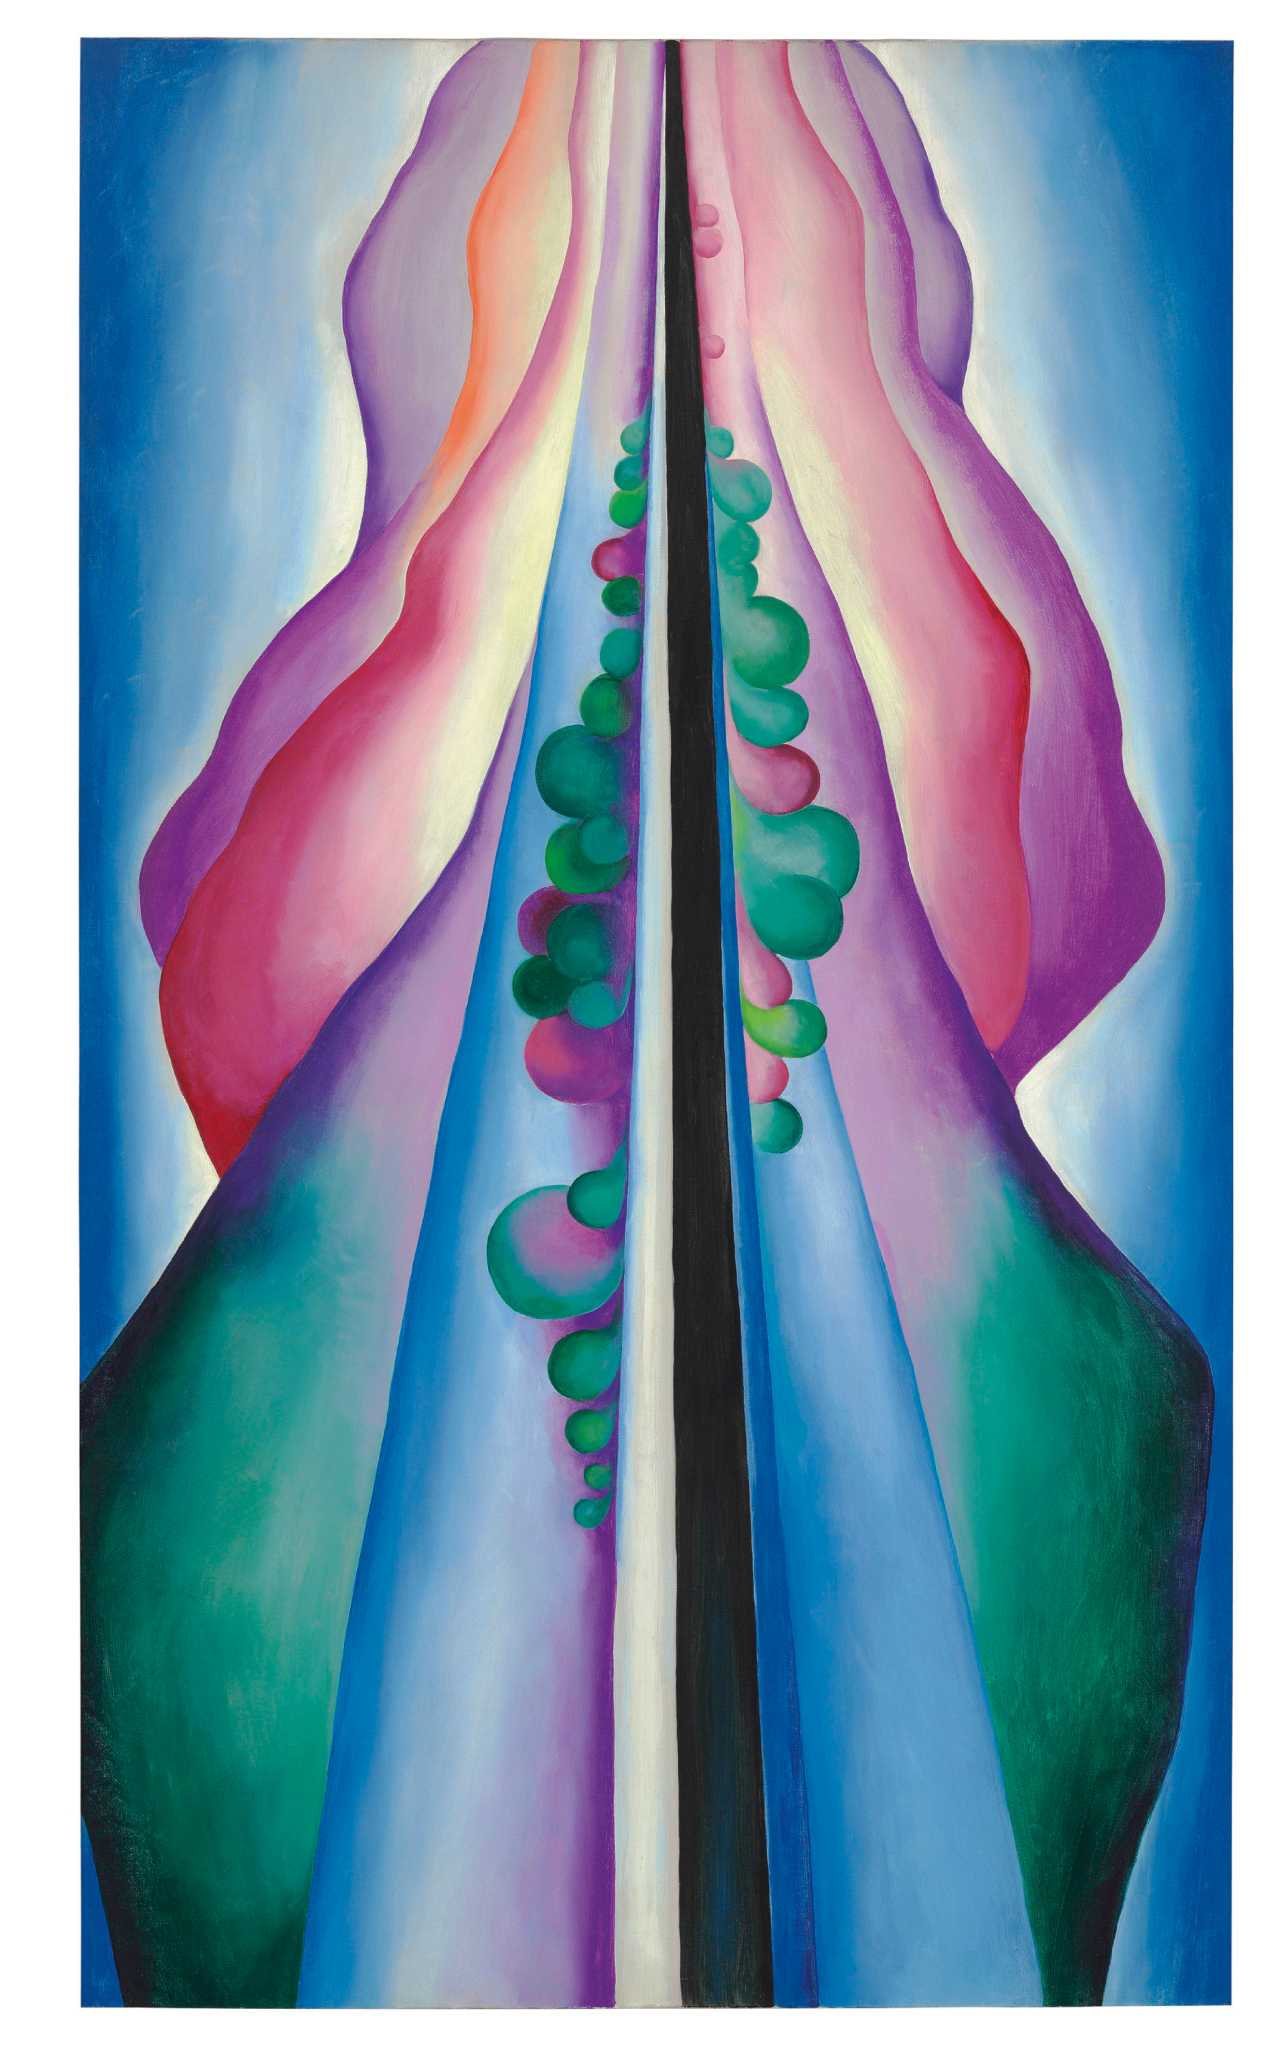 unusual-georgia-o-keeffe-painting-of-lake-george-going-to-auction